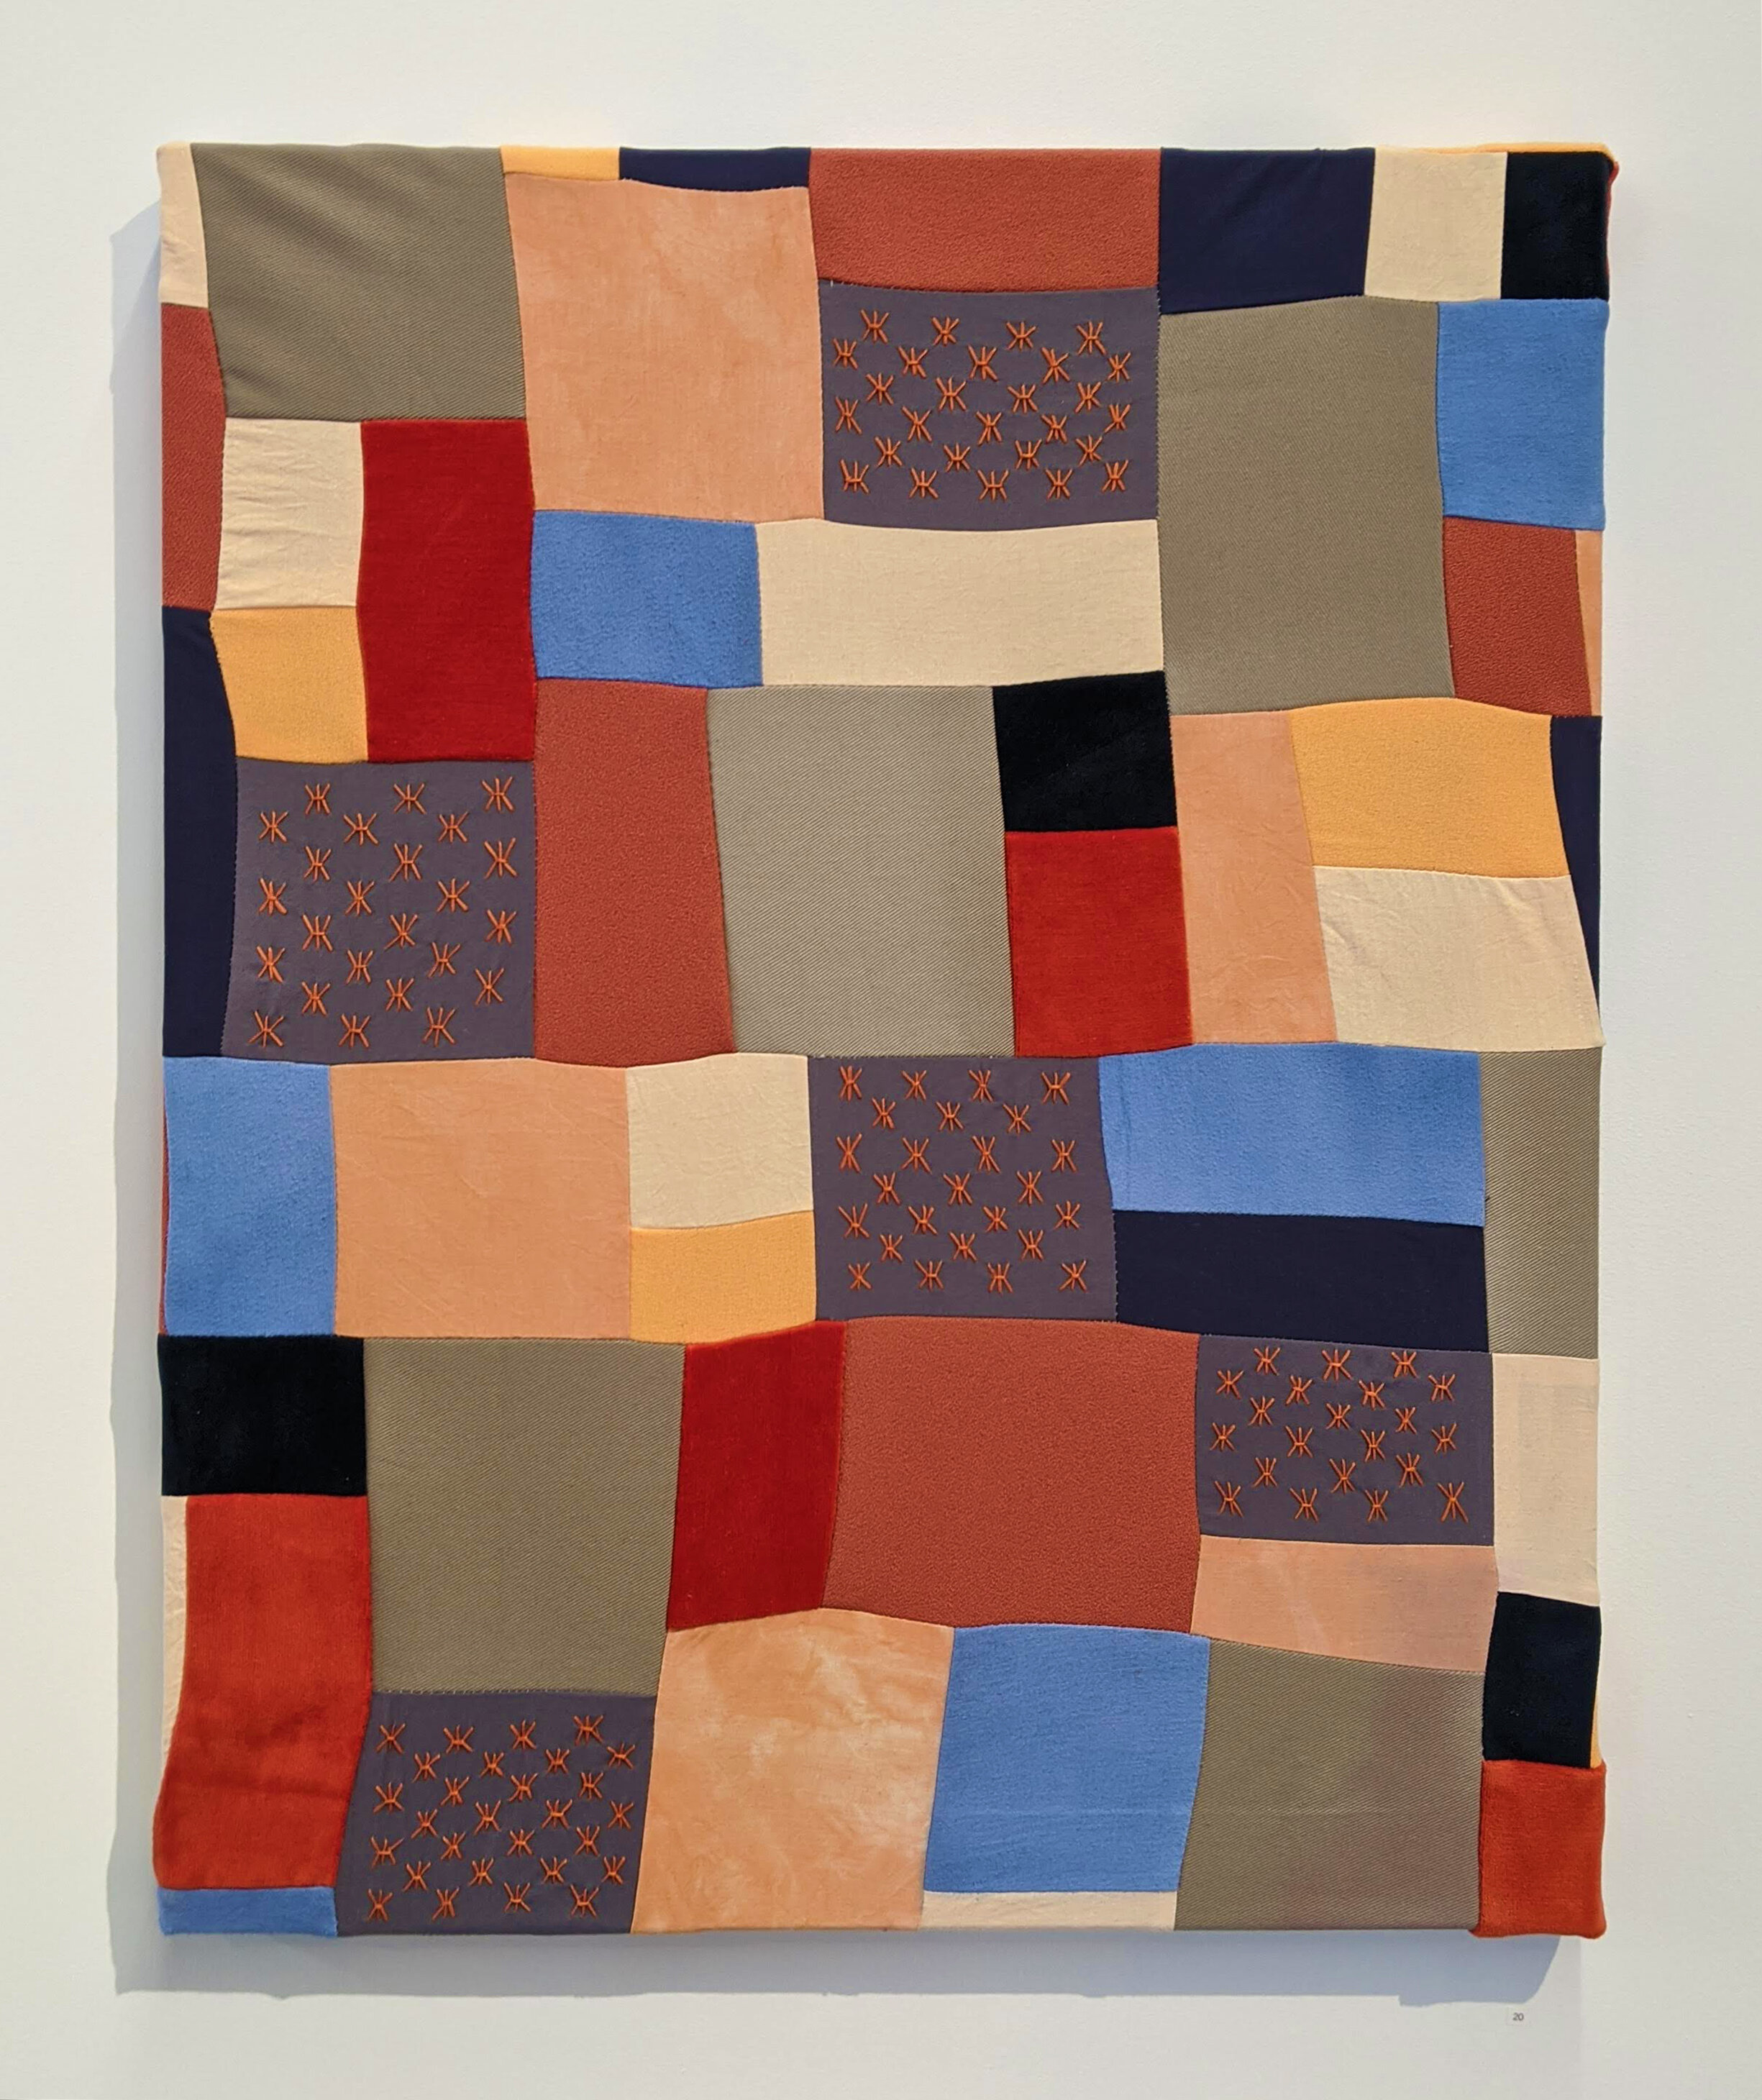 Bundle, 2019, Muslin, canvas, wool, velvet, polyester, faux suede, indigo, osage, embroidery thread,  24” x 30”